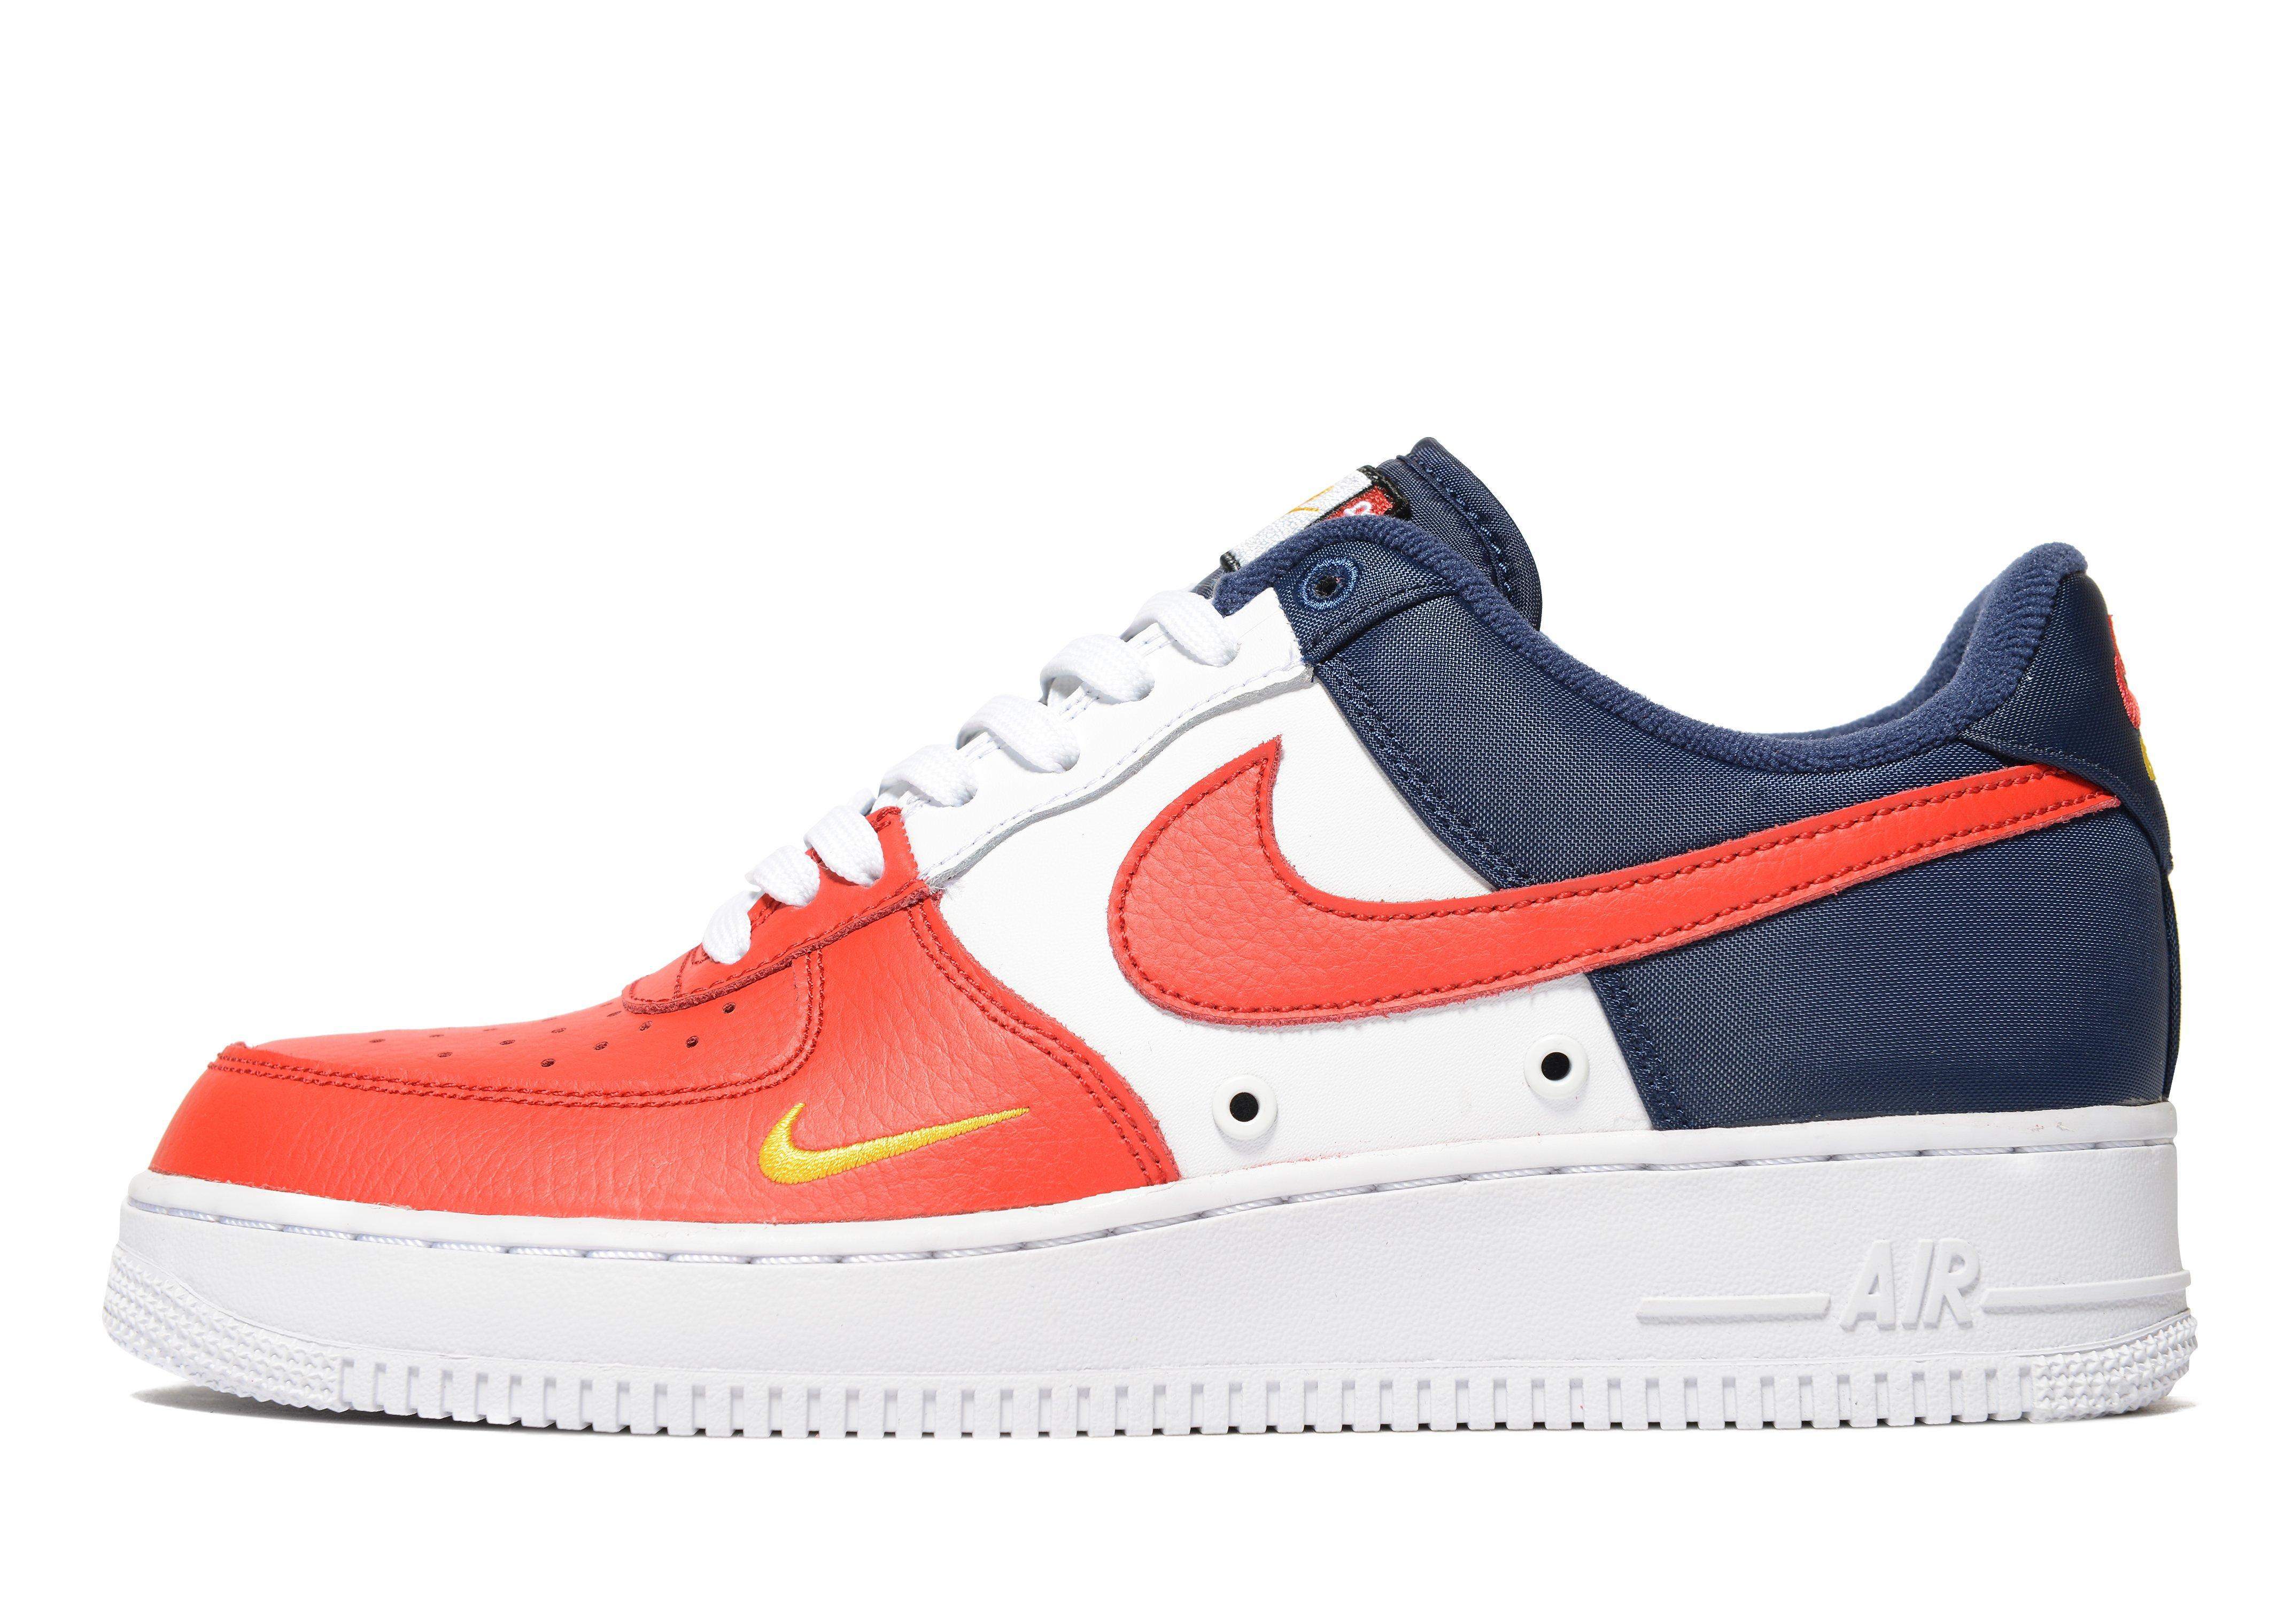 red white and blue af1 lv8